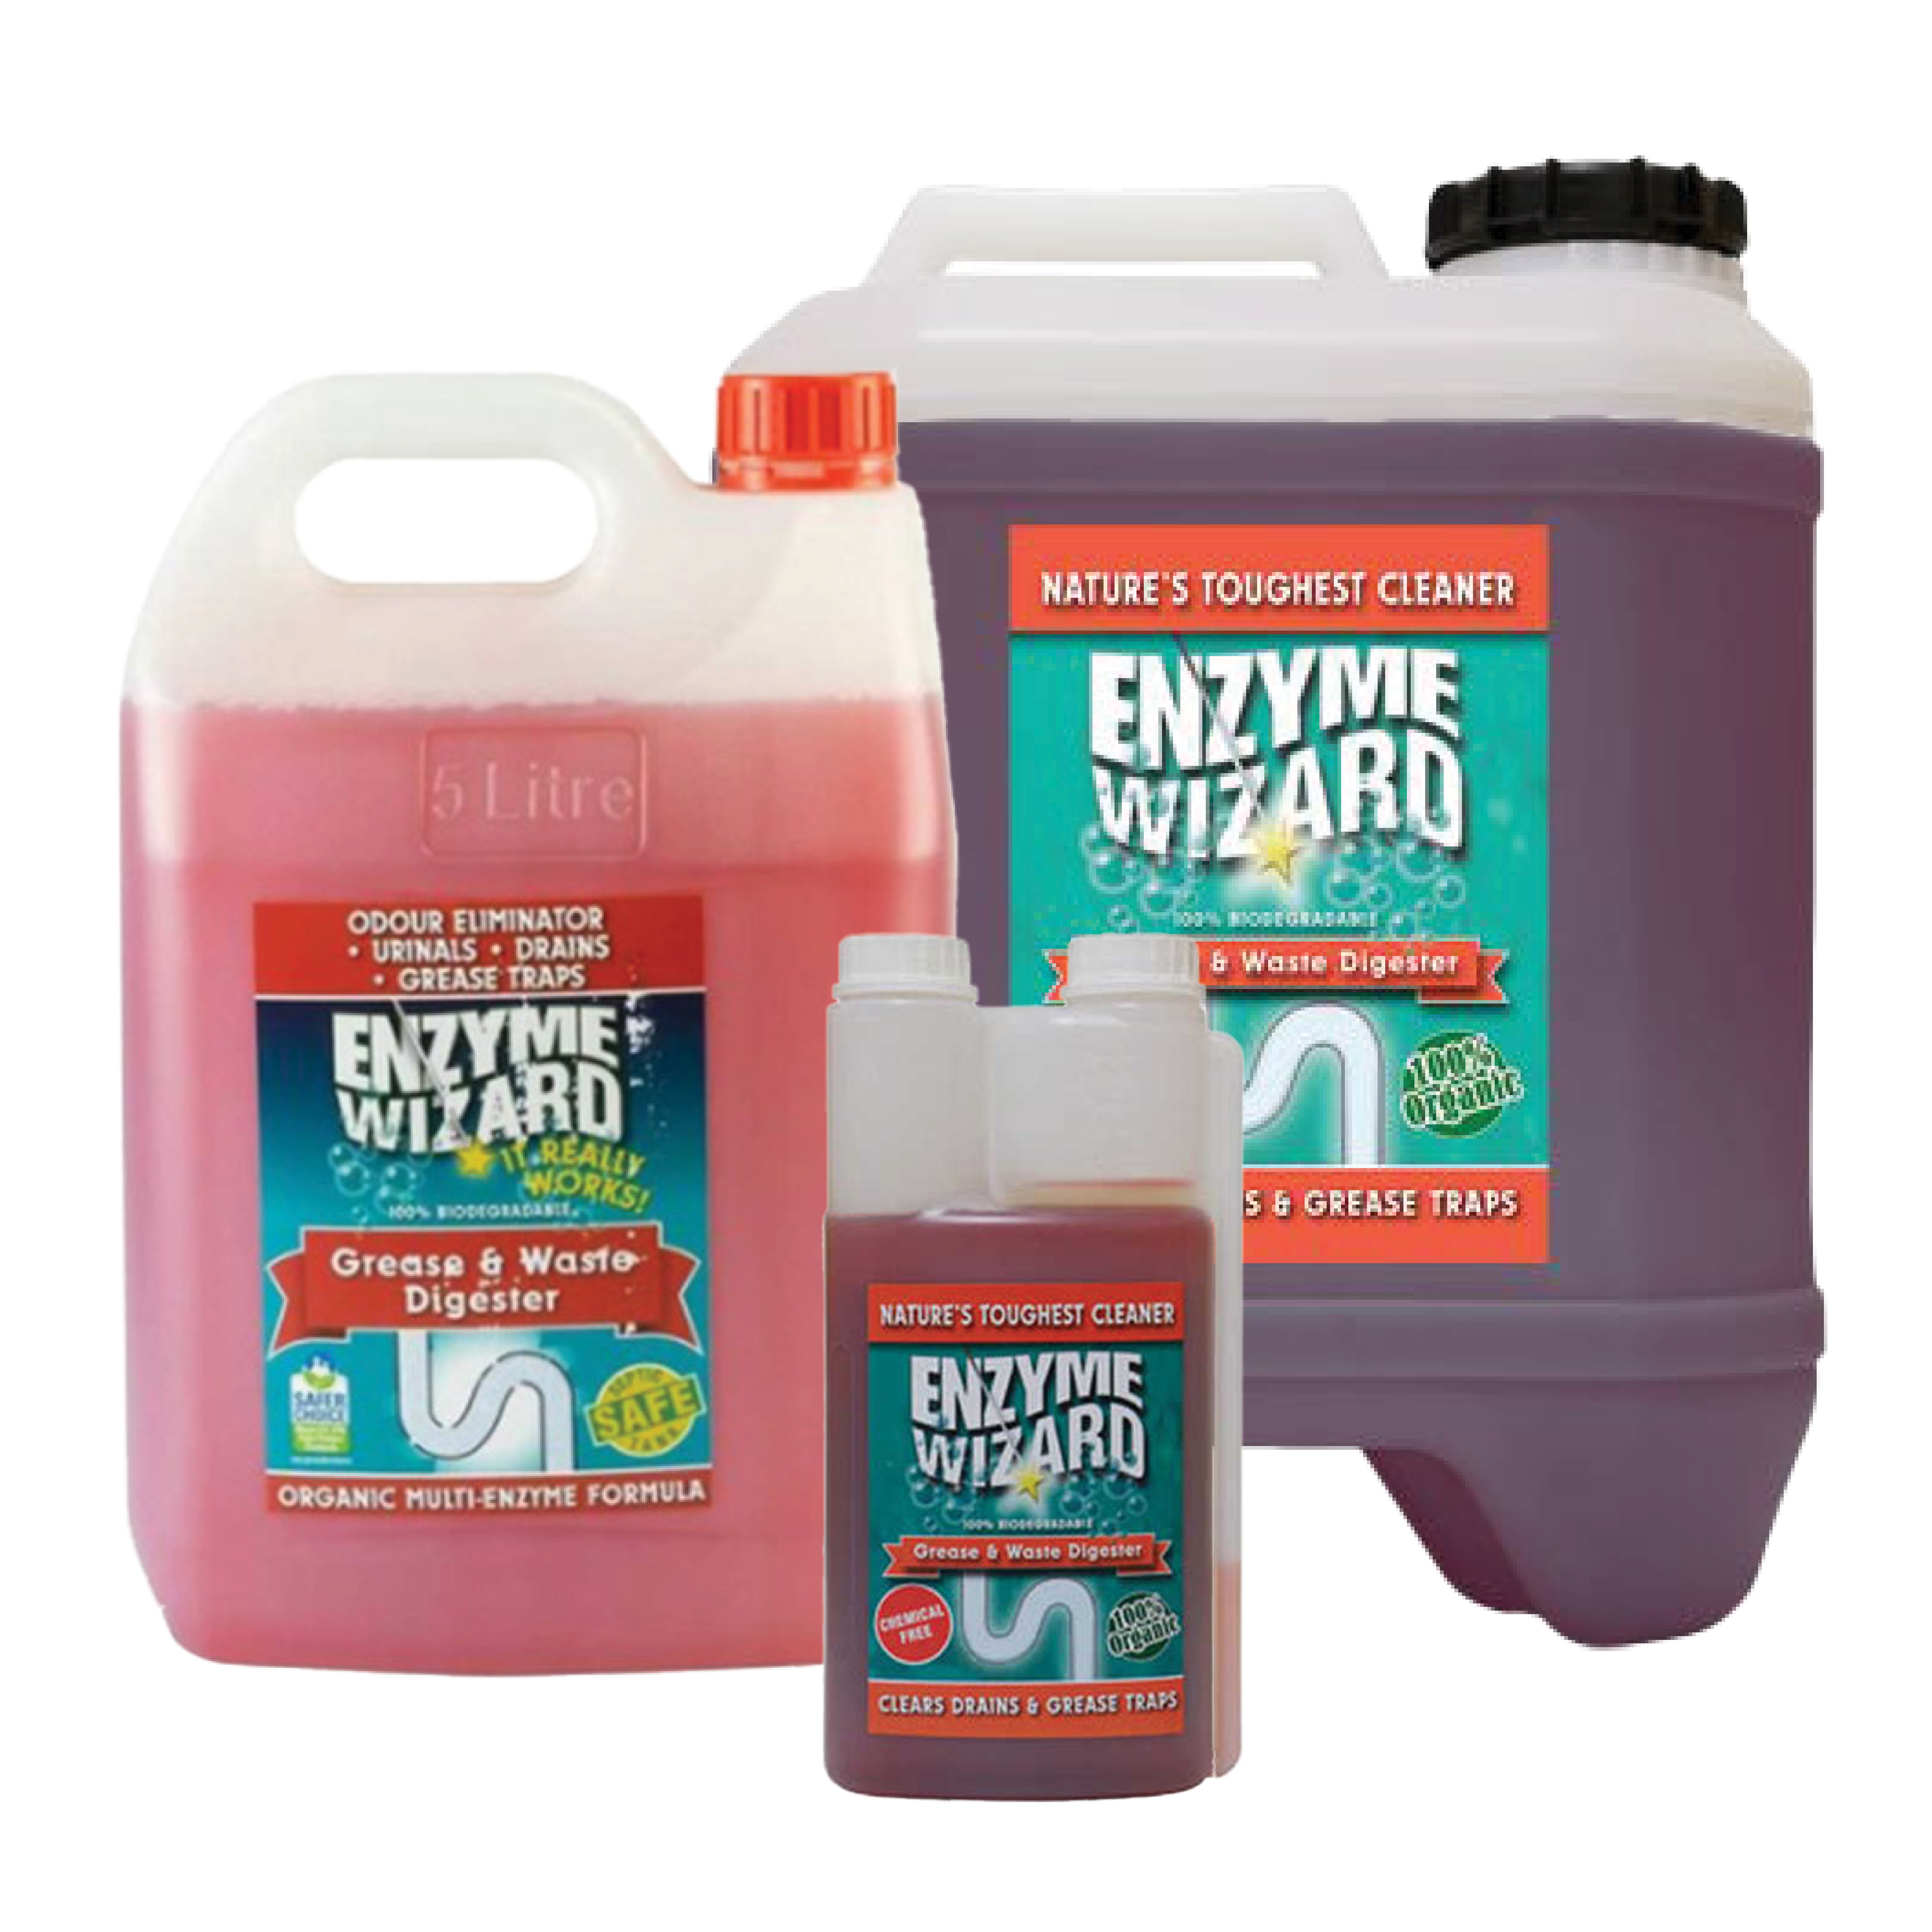 Enzyme Wizard Grease and Waste Digester (each)